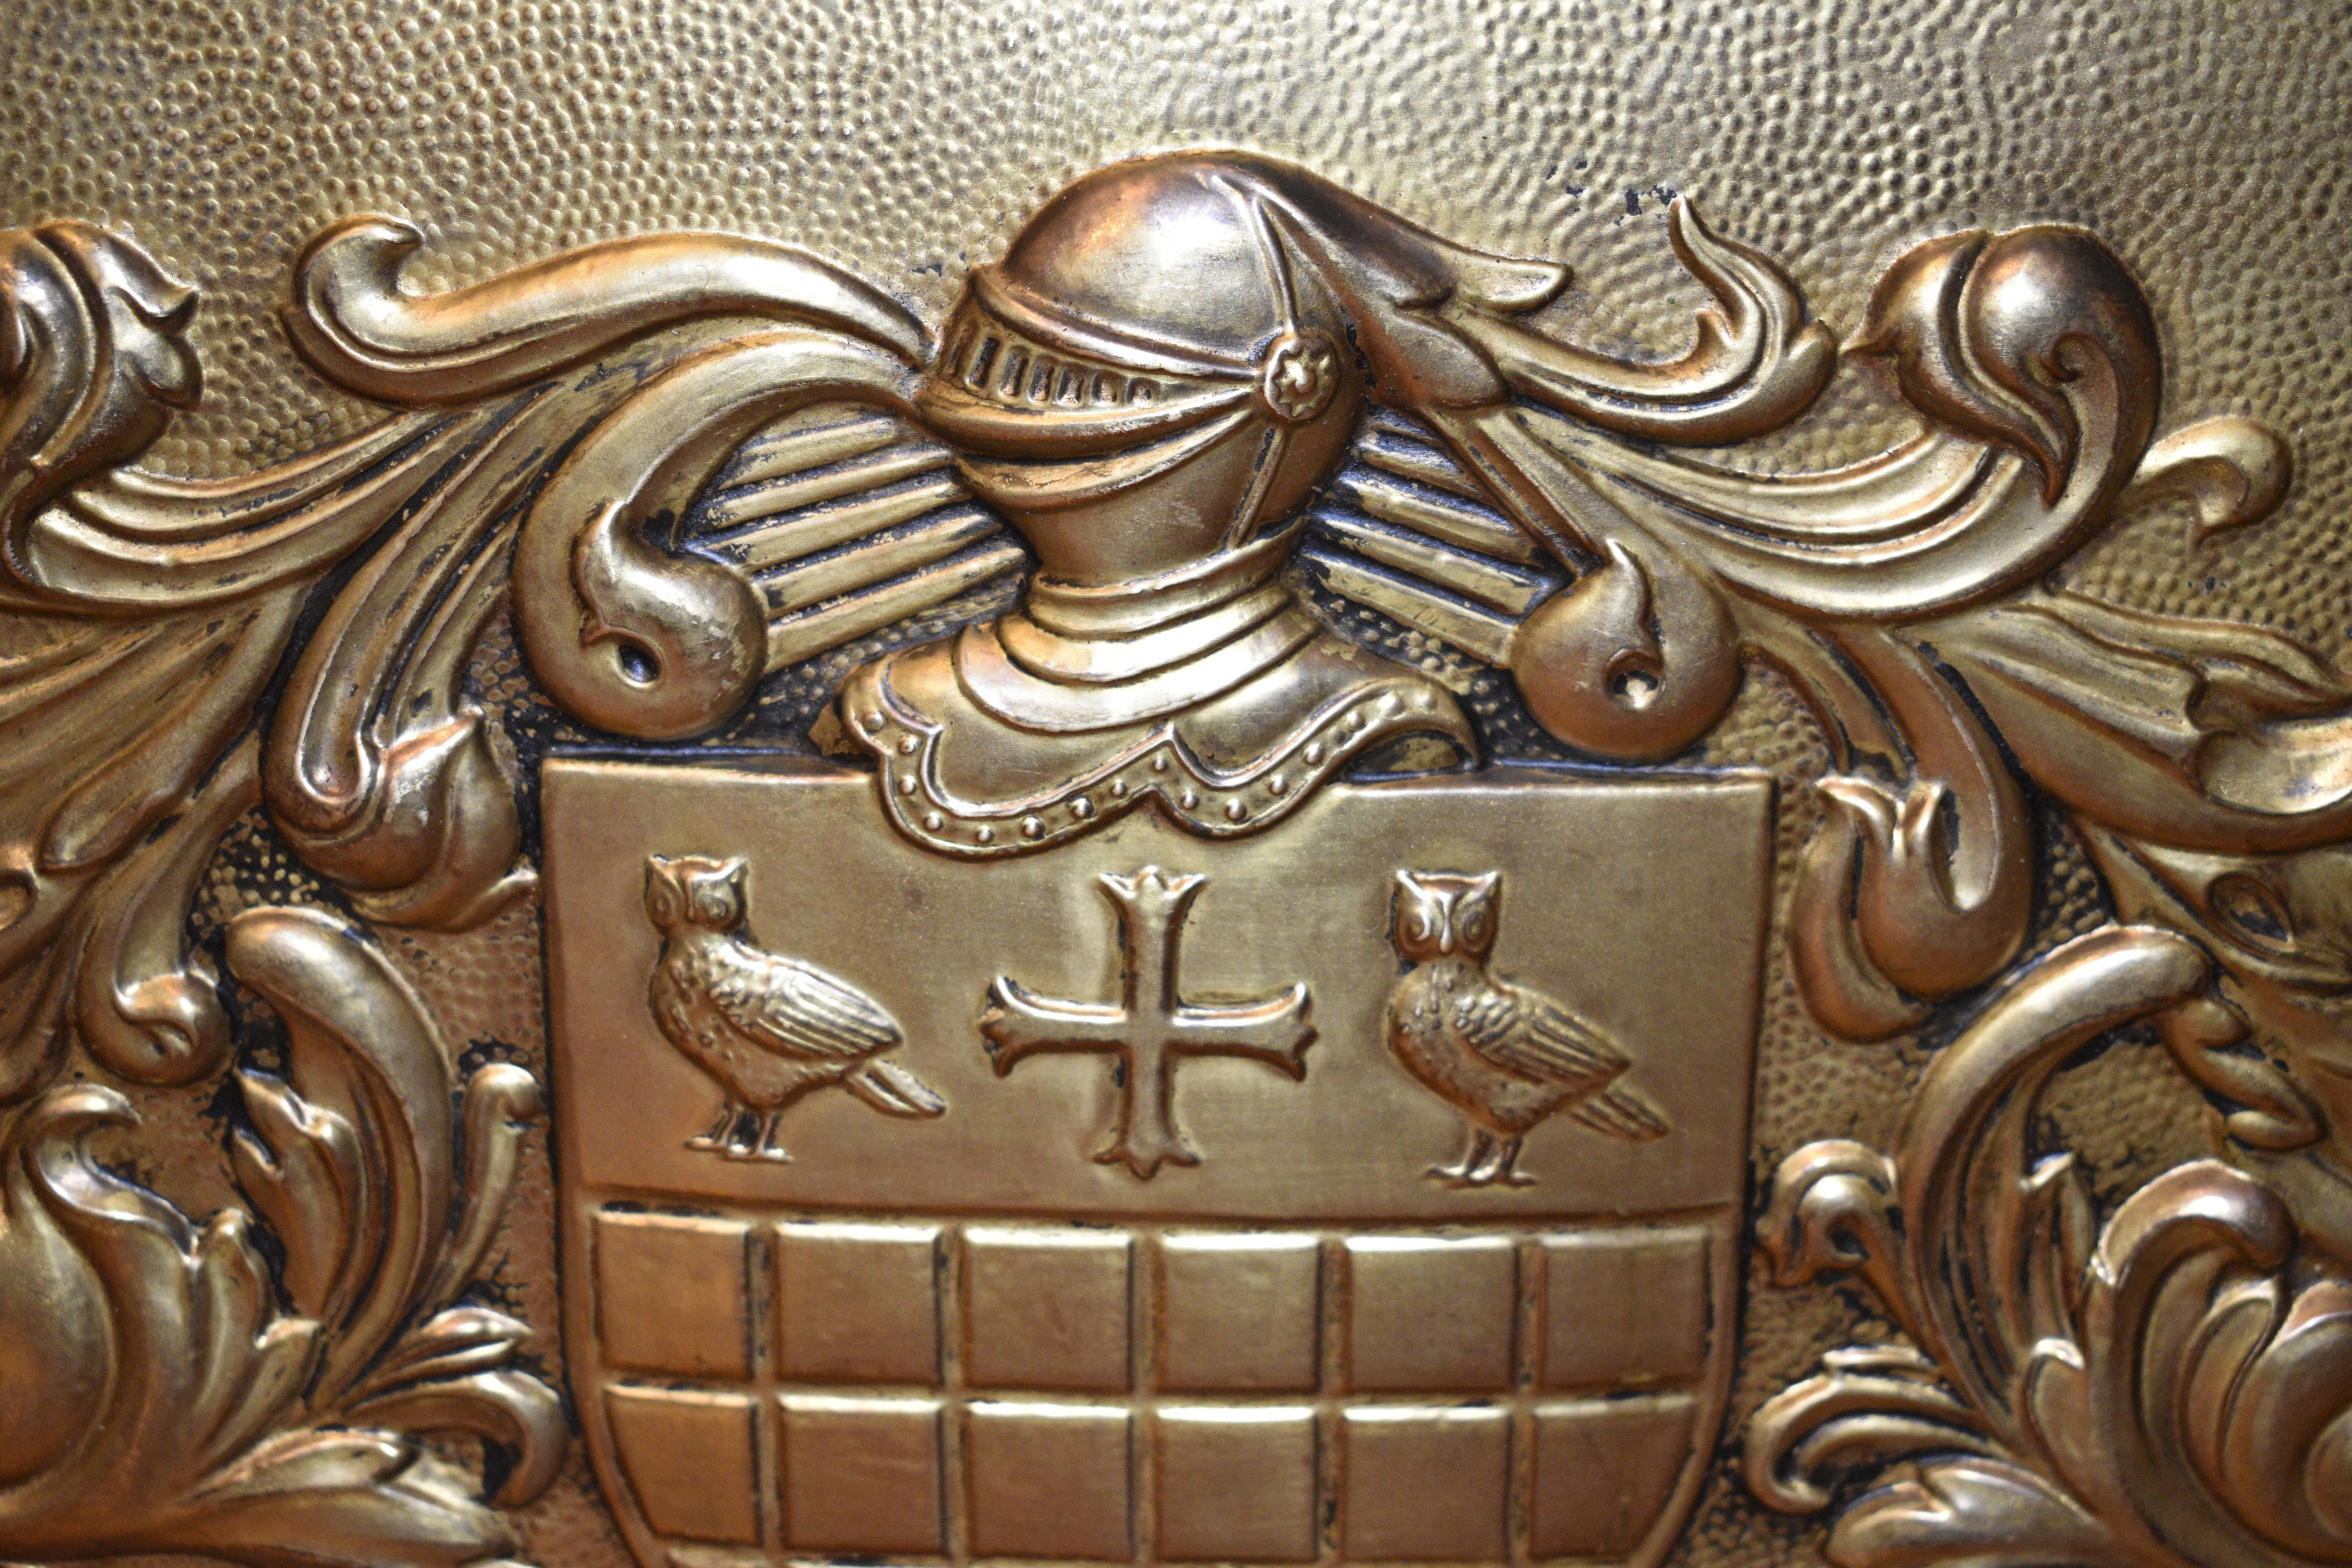  French family coat of arms pressed into the brass, brass handles and original lining.

Circa: 1950

Material: Brass

Country of Origin: France

Measurements: 31cm high, 44cm wide, 17cm deep

Postage via Australia Post with tracking 